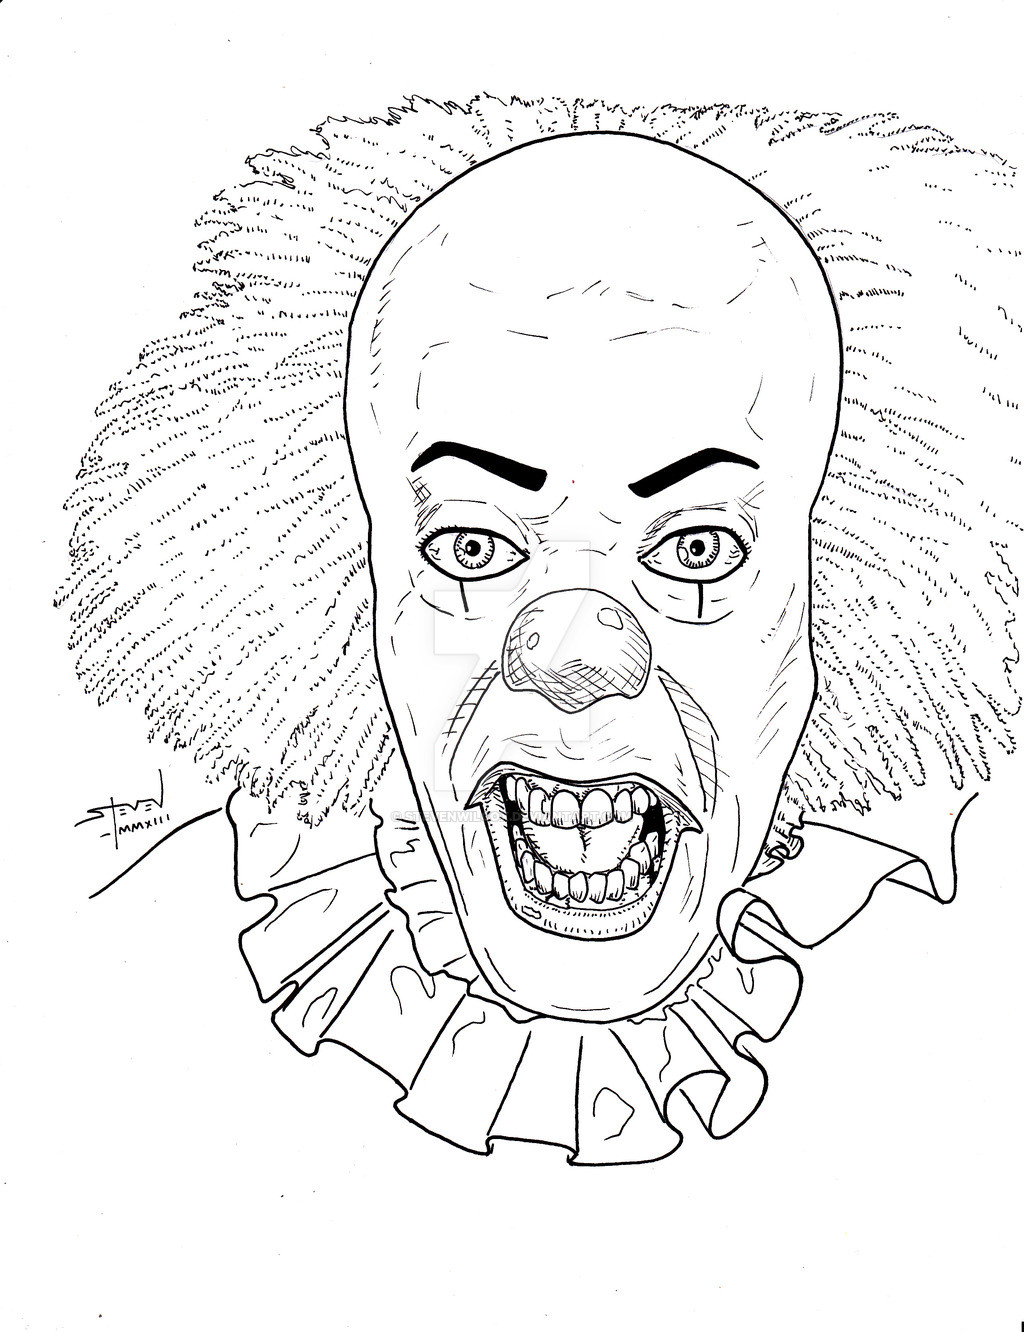 Pennywise Ausmalbilder
 Pennywise the Clown by StevenWilcox on DeviantArt